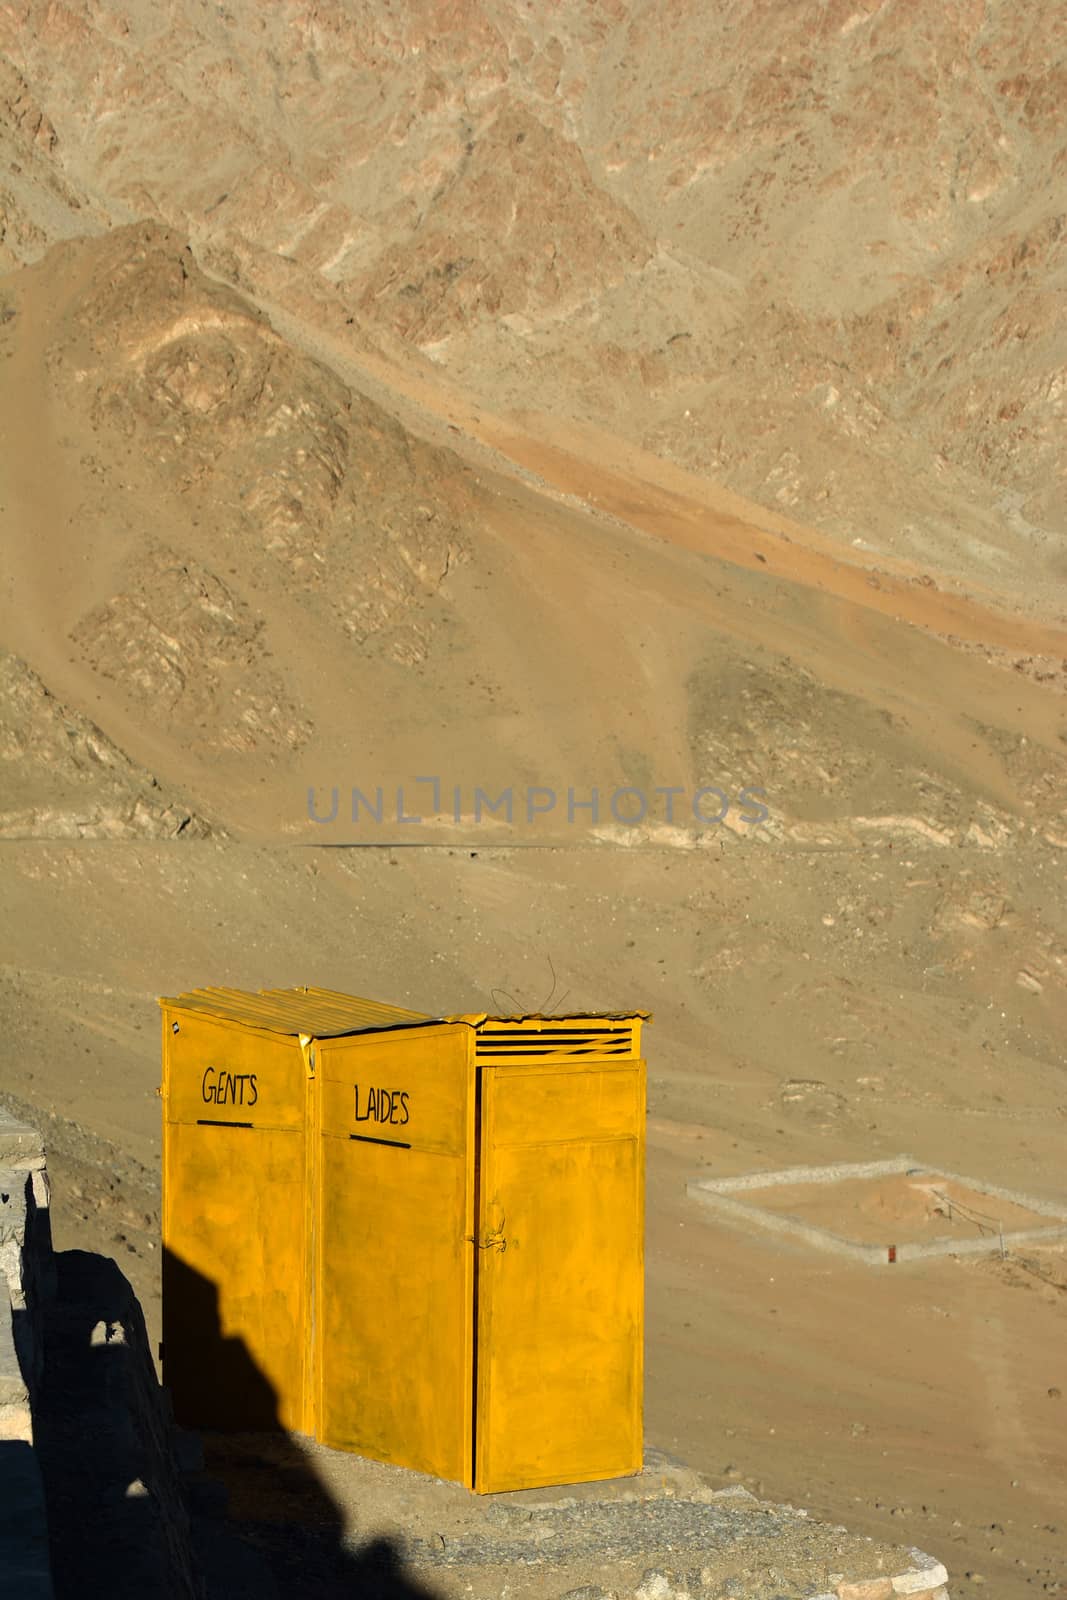 The toilet at viewpoint of Leh city, Ladakh, India by think4photop